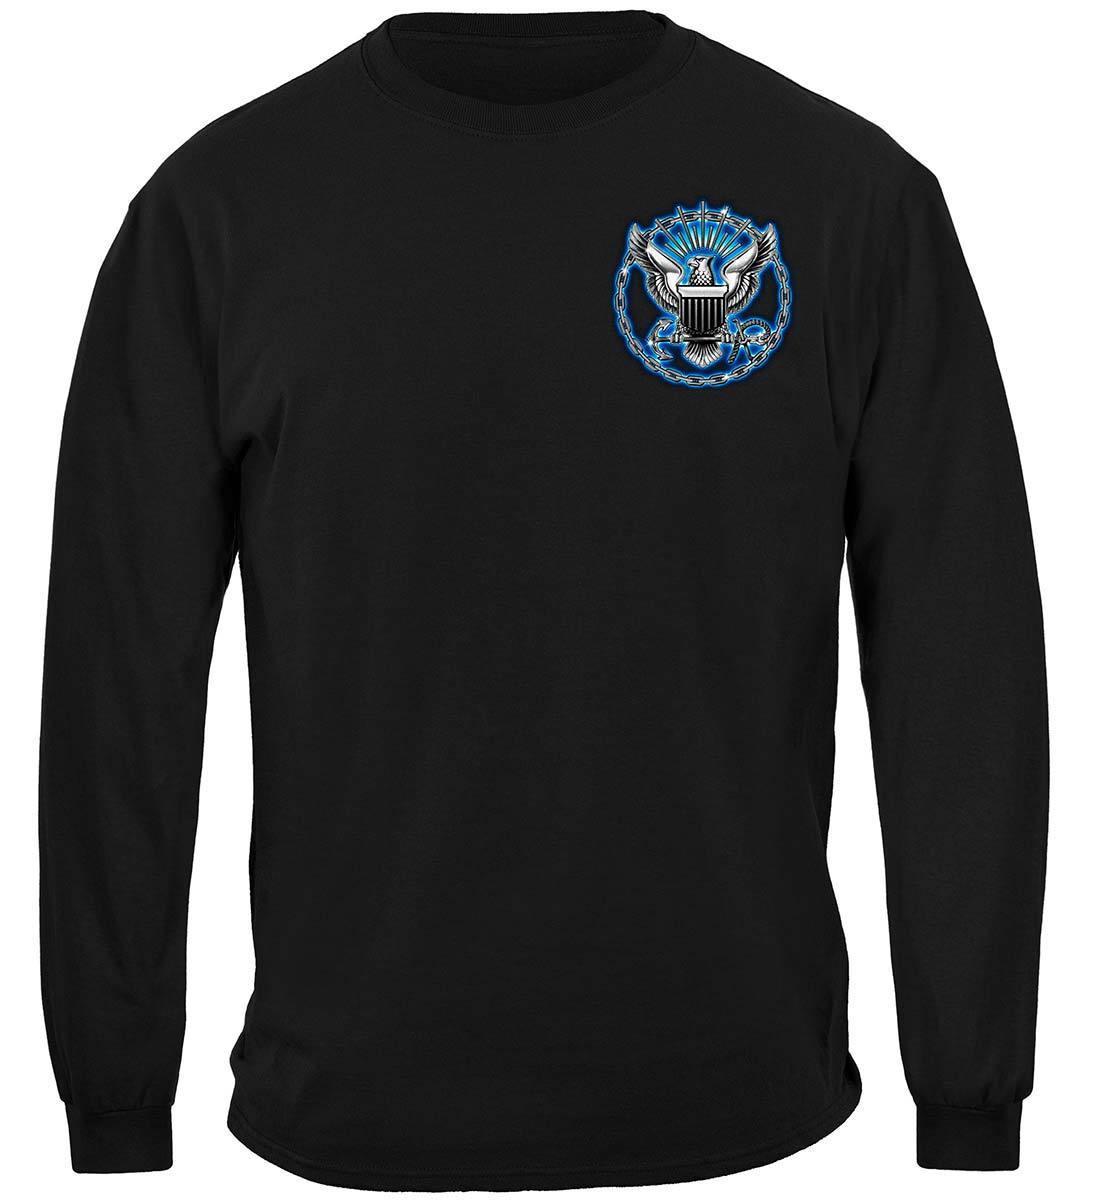 Navy All Gave Some Hoodie - Military Republic